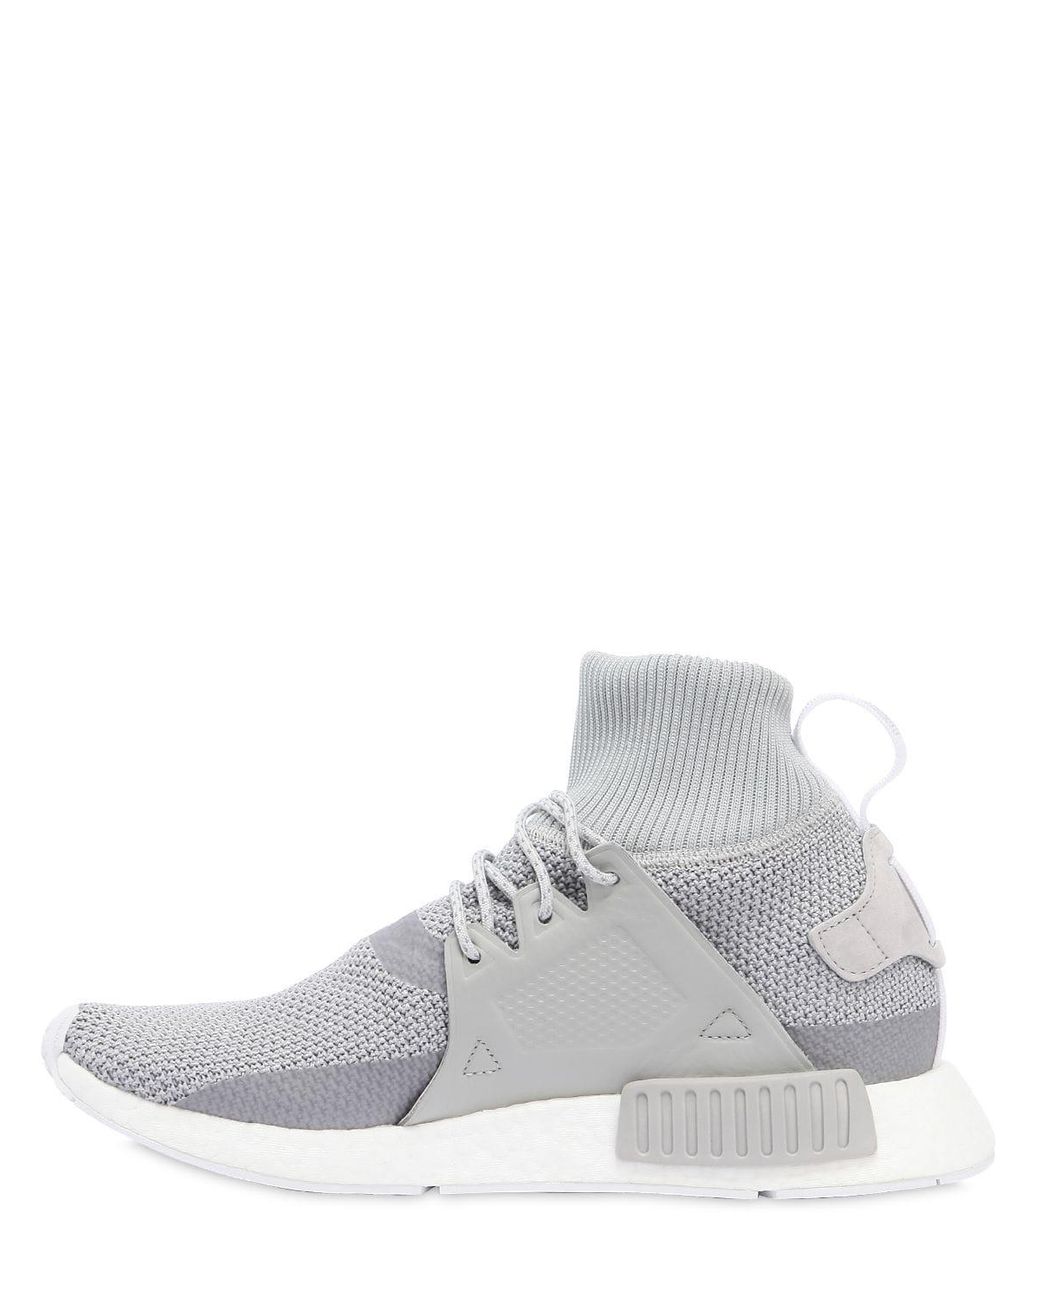 adidas Originals Leather Nmd Xr1 Winter Trainers in Light Grey (Gray) for  Men | Lyst